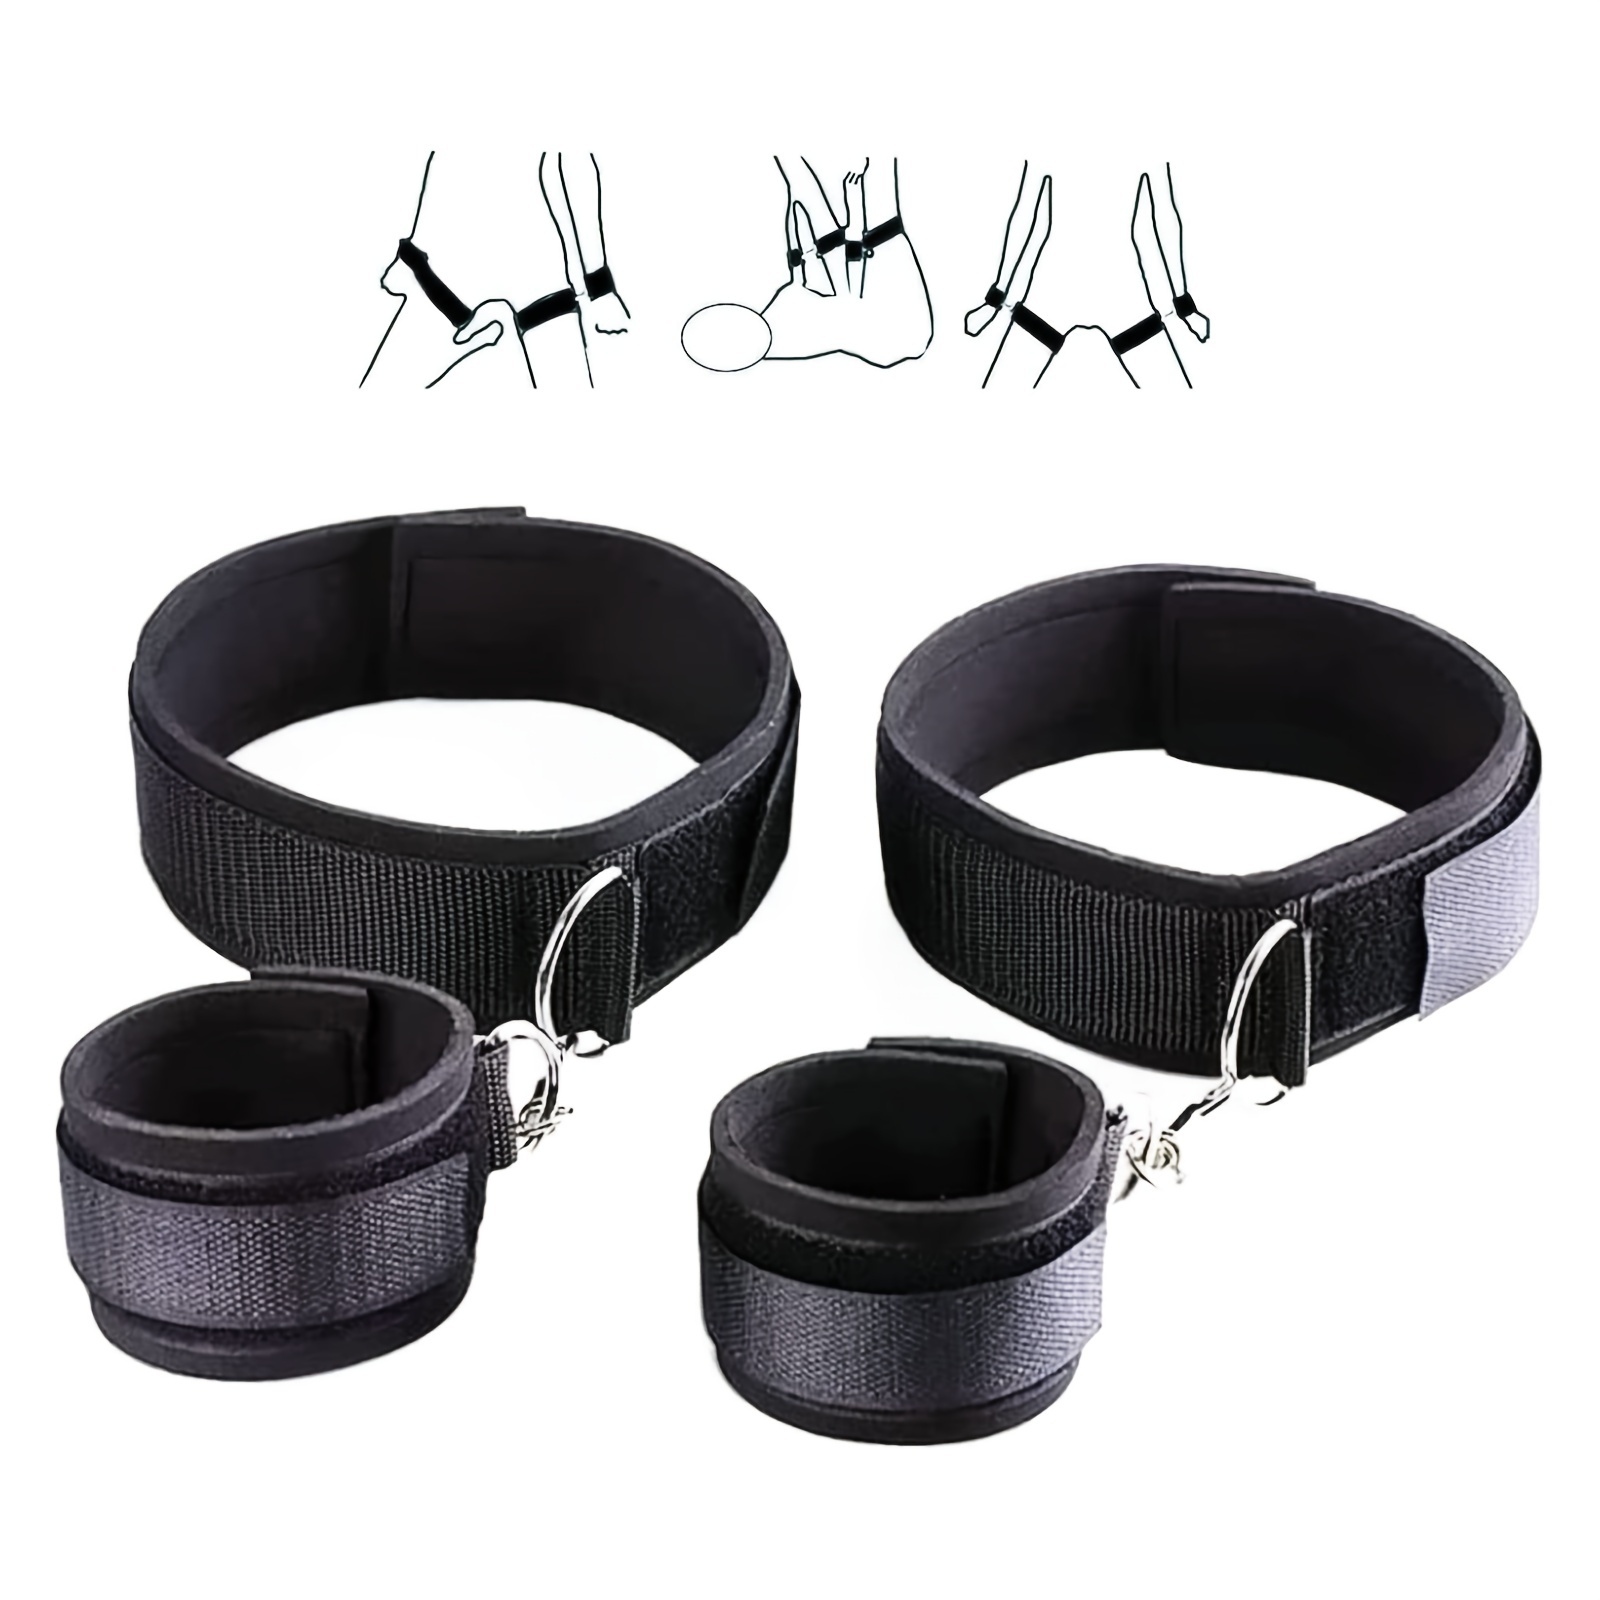 Bed Restraints for Sex Wrist Ankle Cuffs with Adjustable Straps for Bondage  and BDSM Couples SM Sex Play